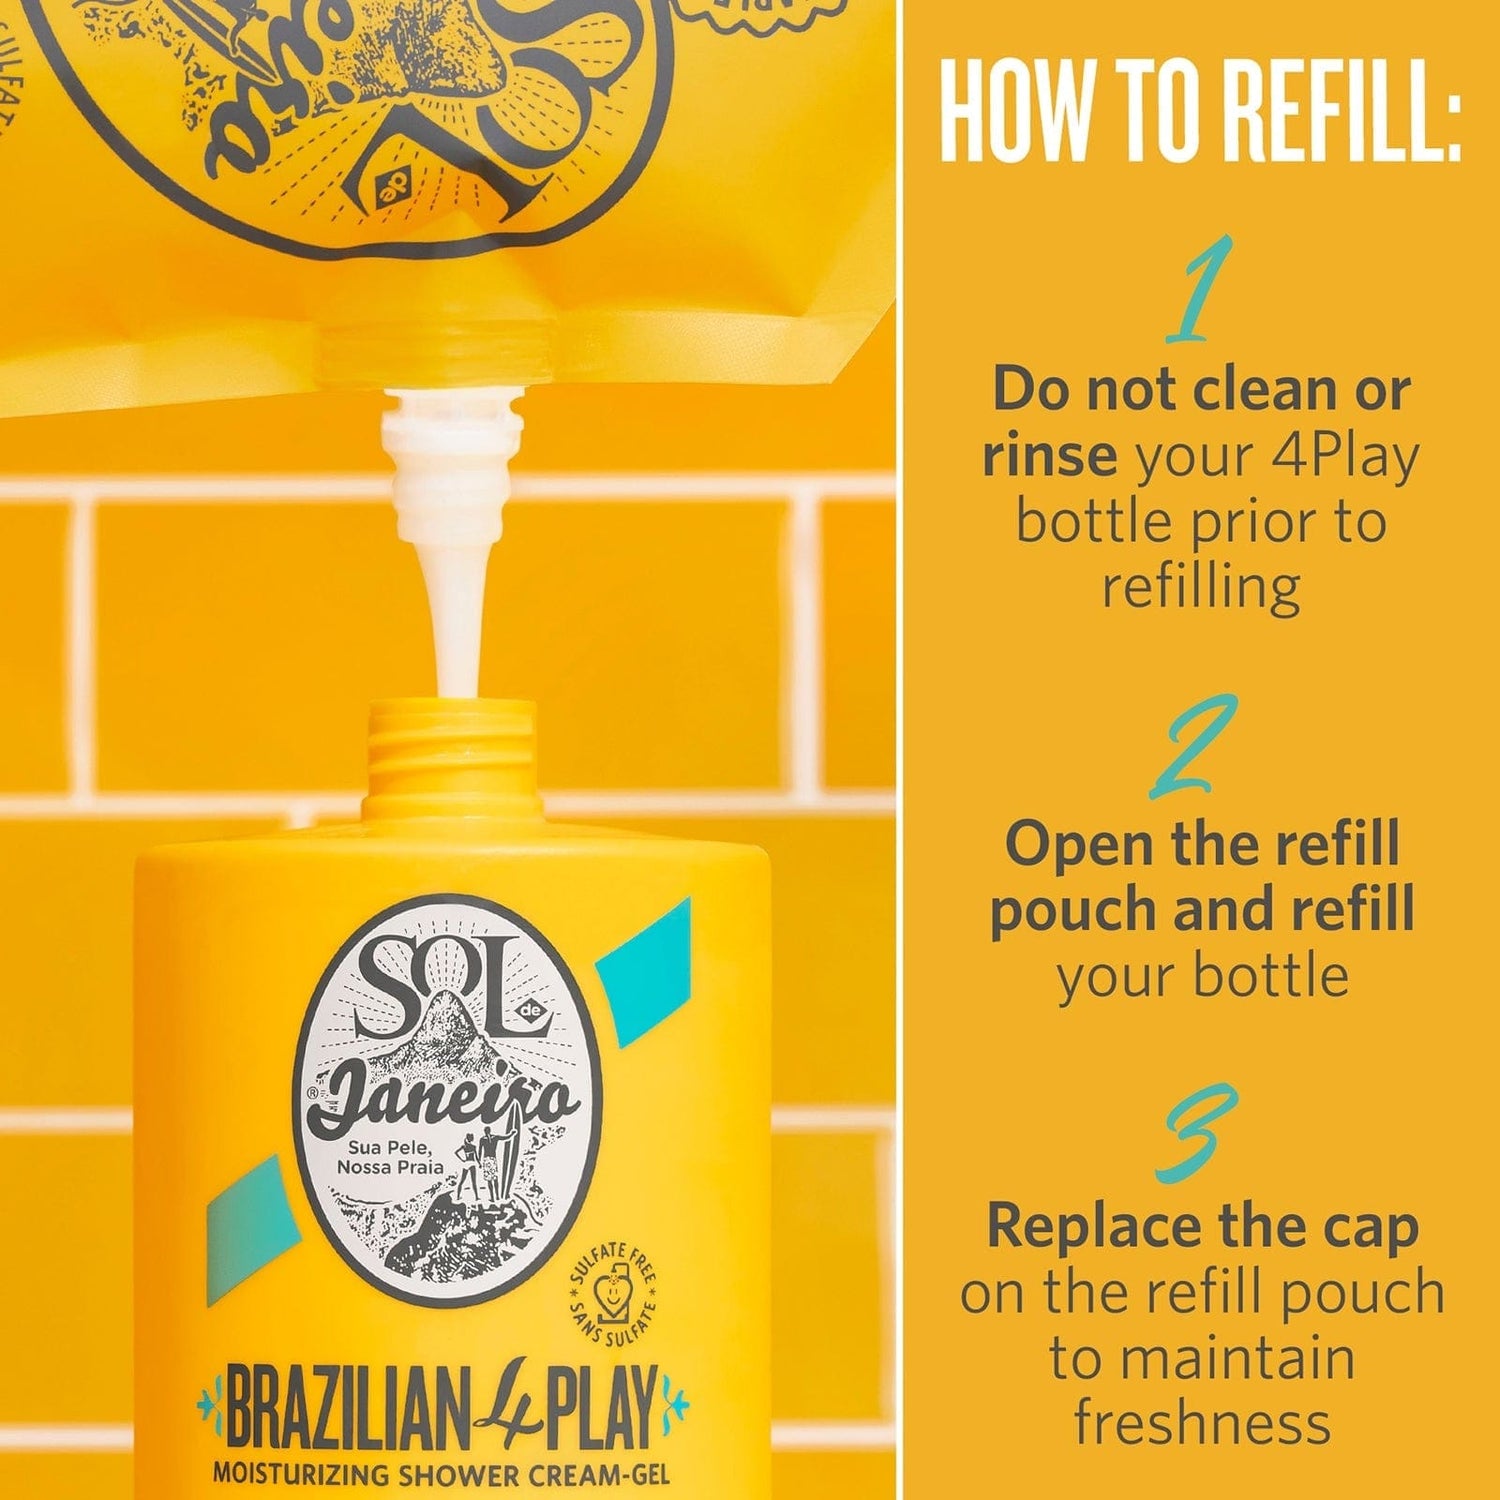 How to refill: 1. do not clean or rinse your 4play bottle prior to refilling. 2. Open the refill pouch and refill your bottle. 3. Replace the cap on the refill pouch to maintain freshness